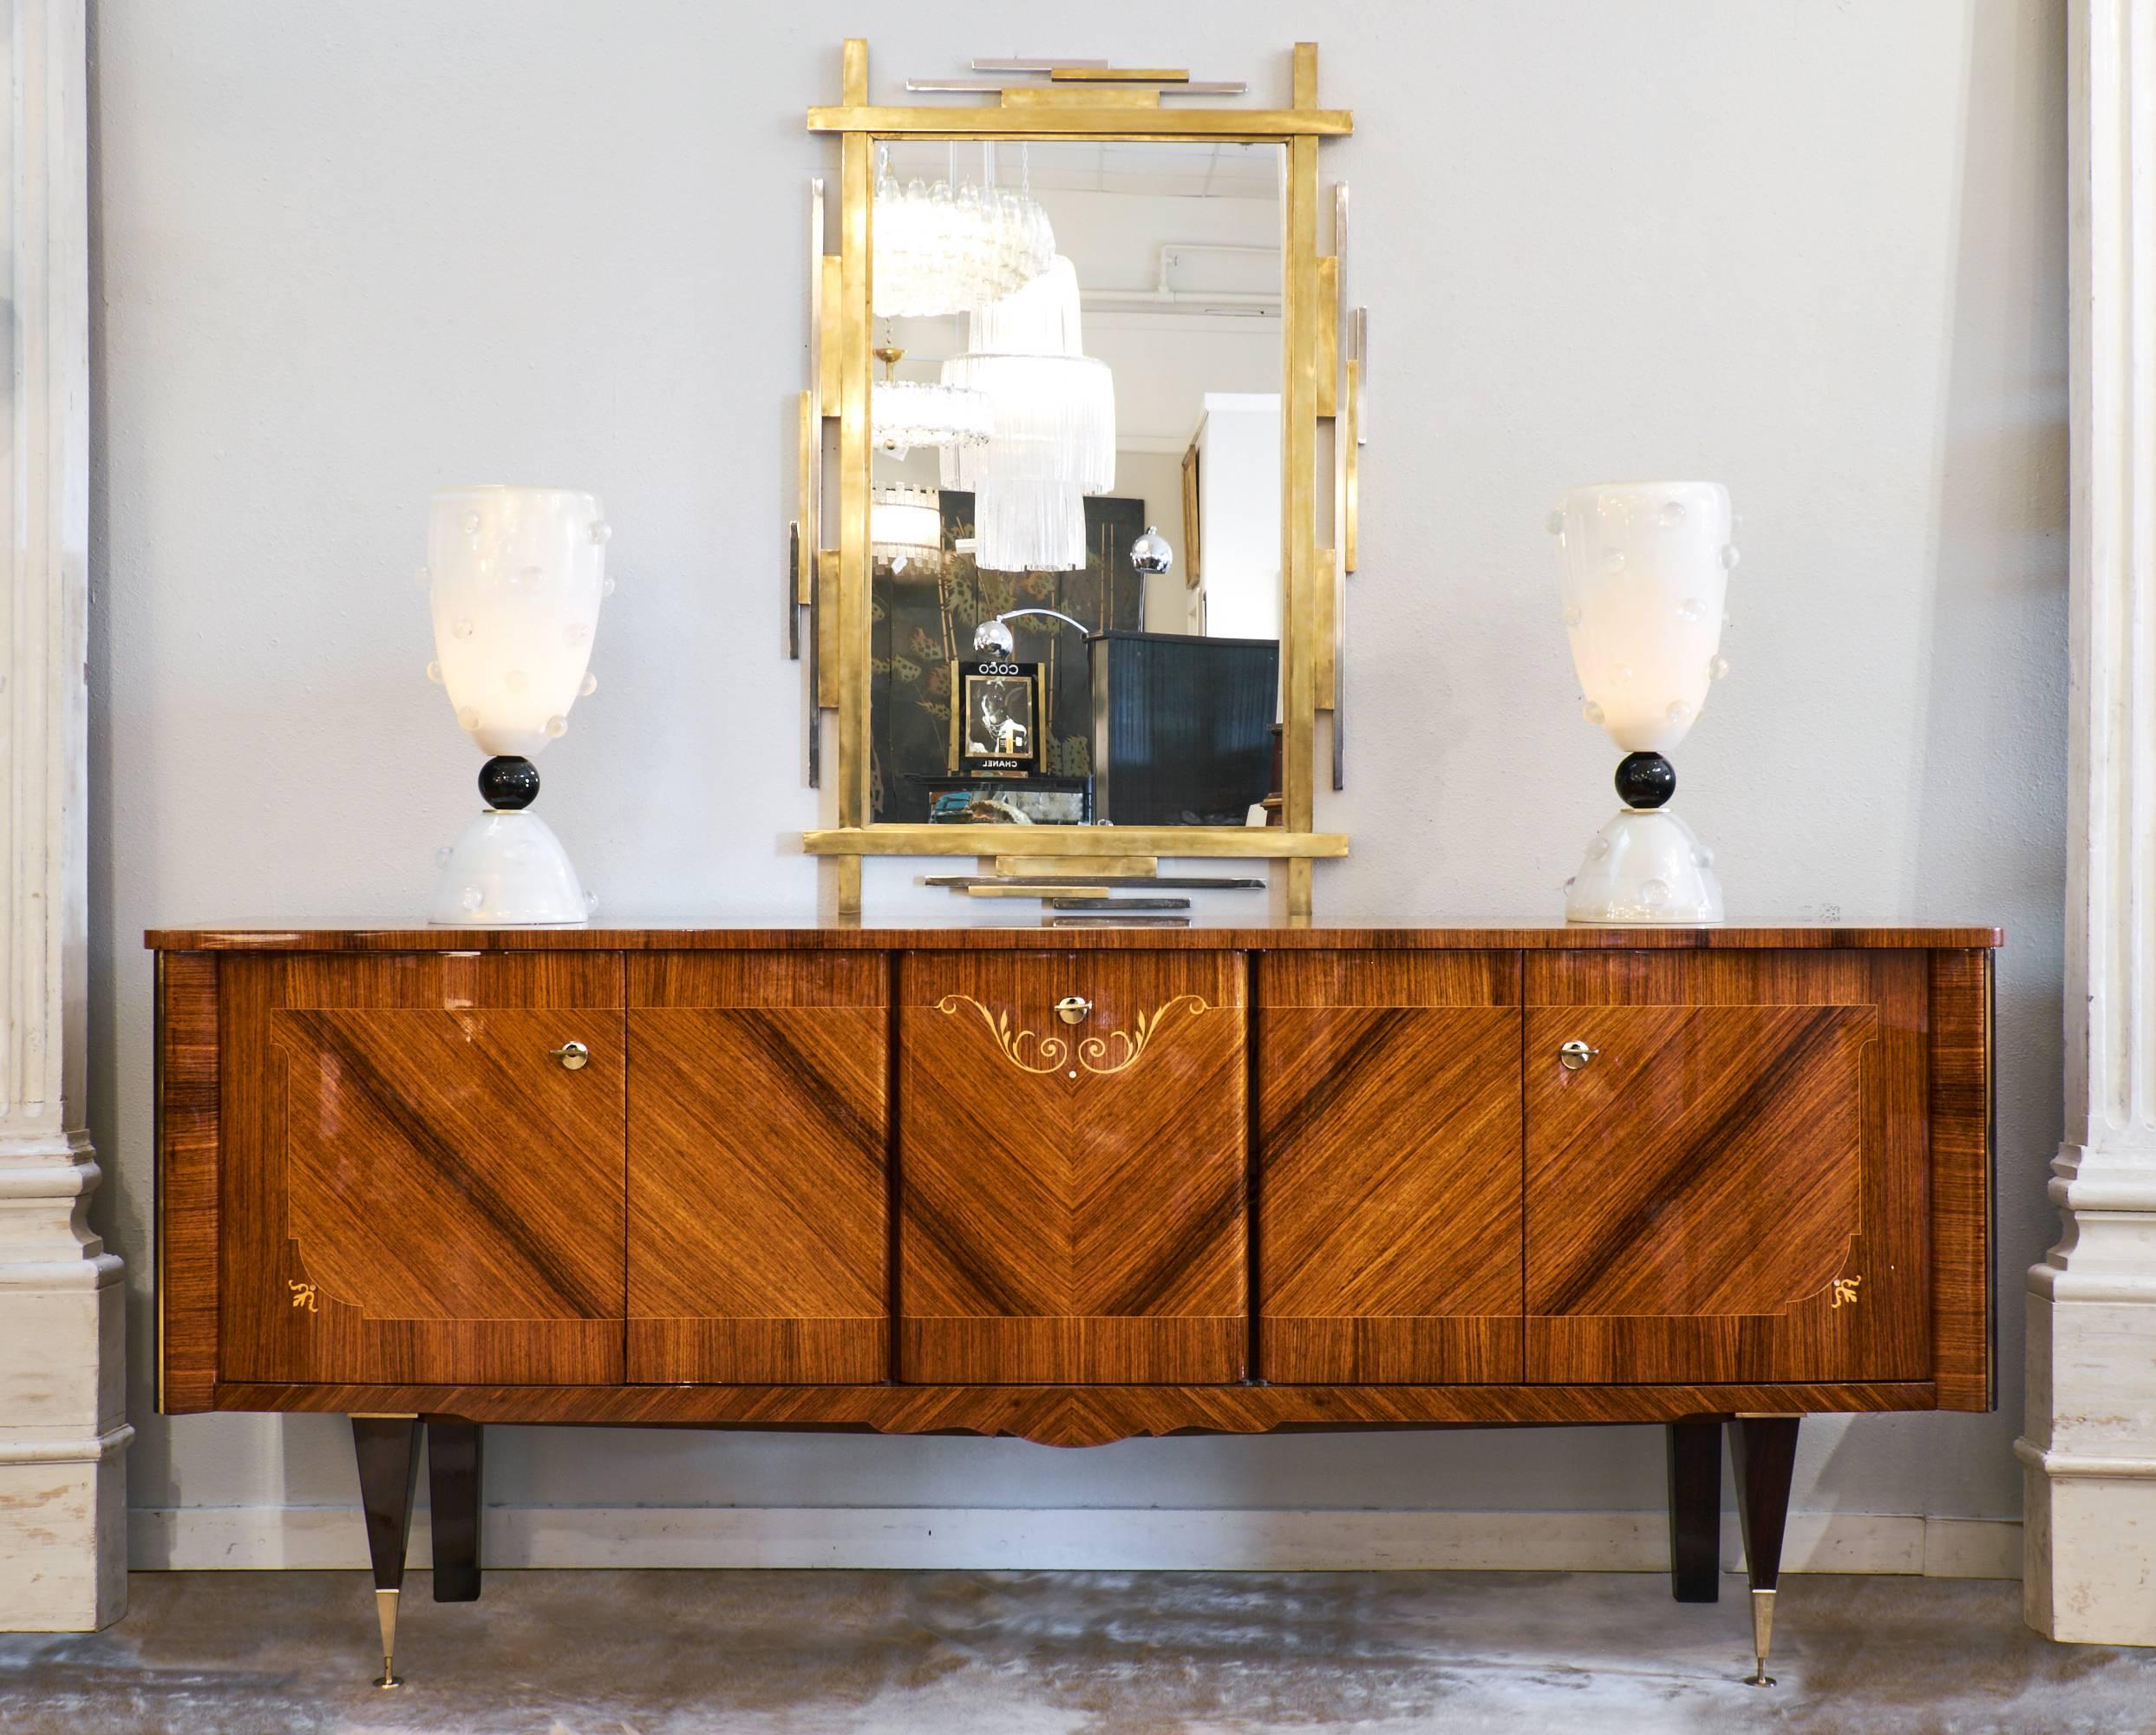 French Mid-Century Modern period credenza or buffet with a high polish rosewood exterior and lemonwood inlay, accented by ebonized and brass details and feet. Five doors open to reveal a lemon wood interior with adjustable shelves (both wood and